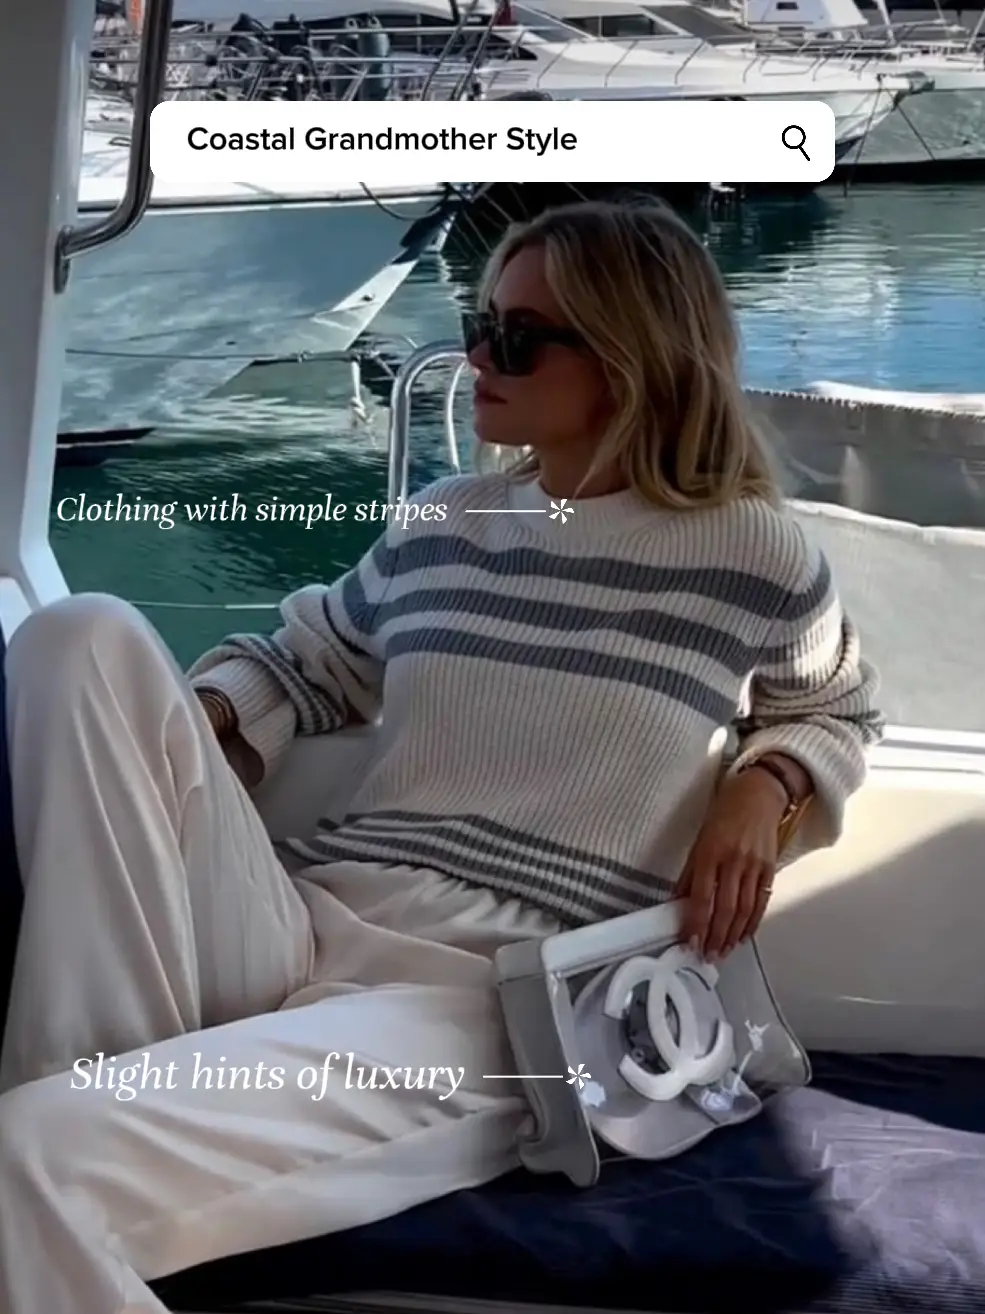  A woman wearing a white striped sweater and white pants is sitting on a boat.